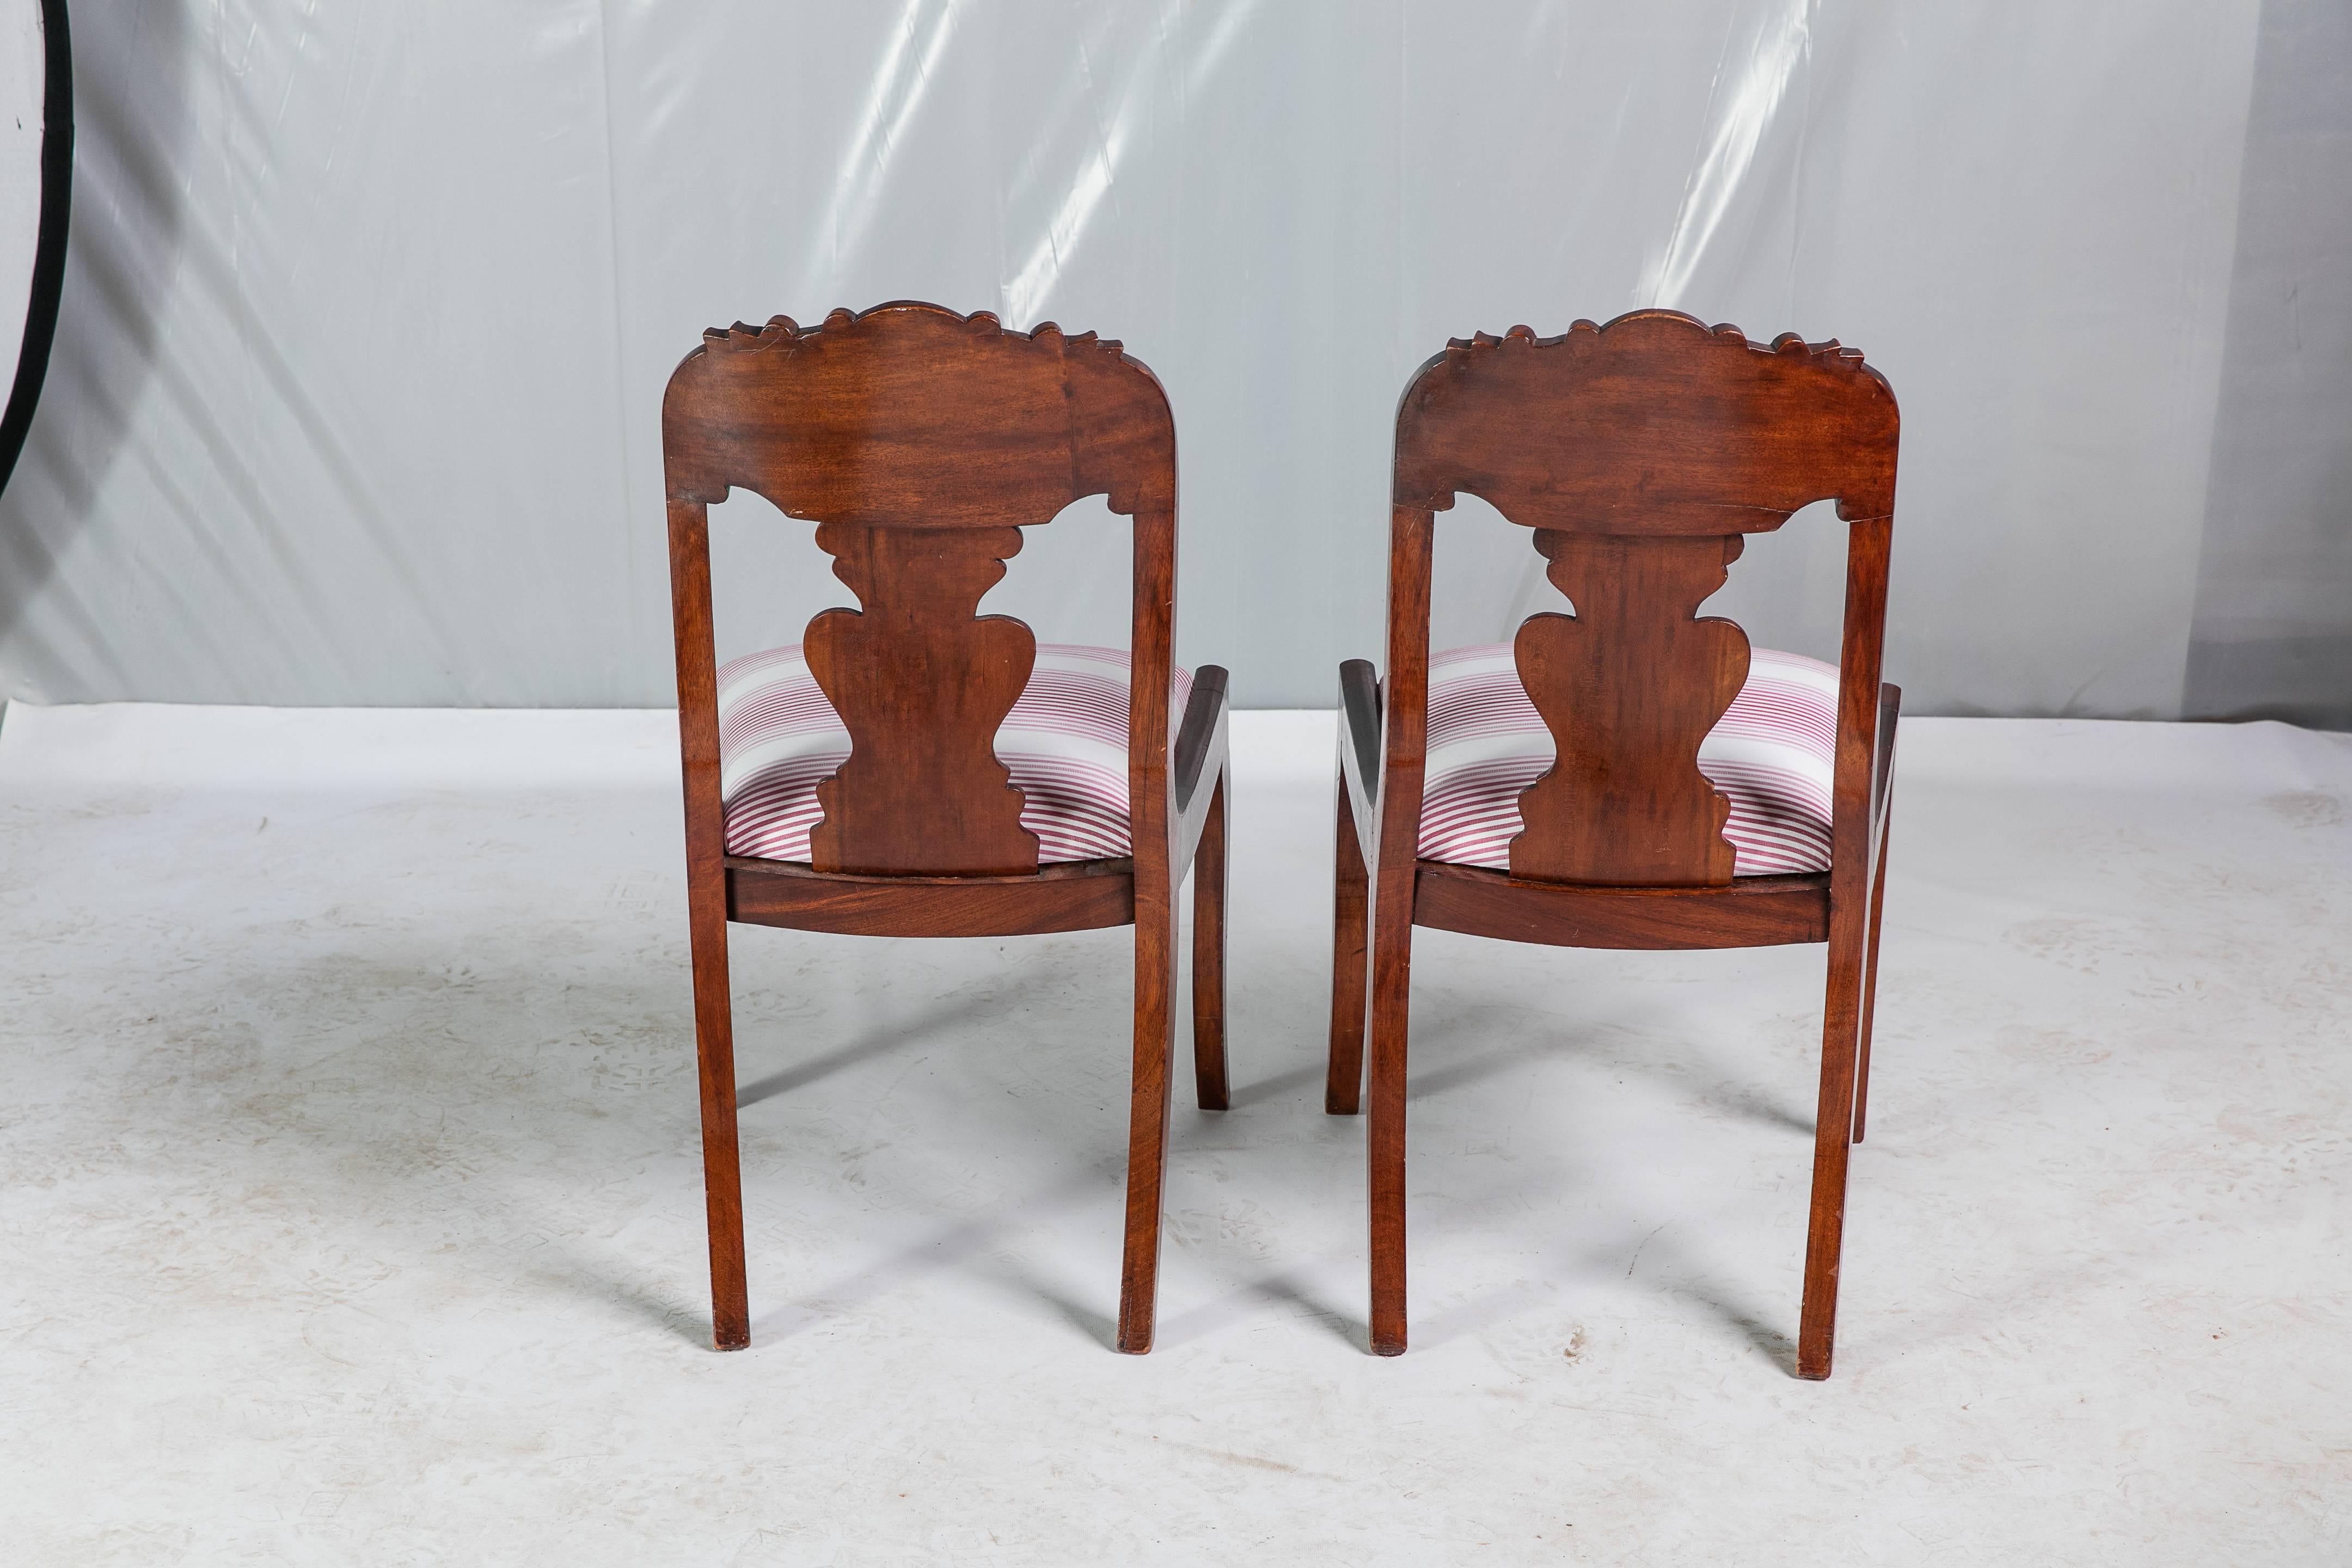 British 19th Century Accent Chairs, Pair For Sale